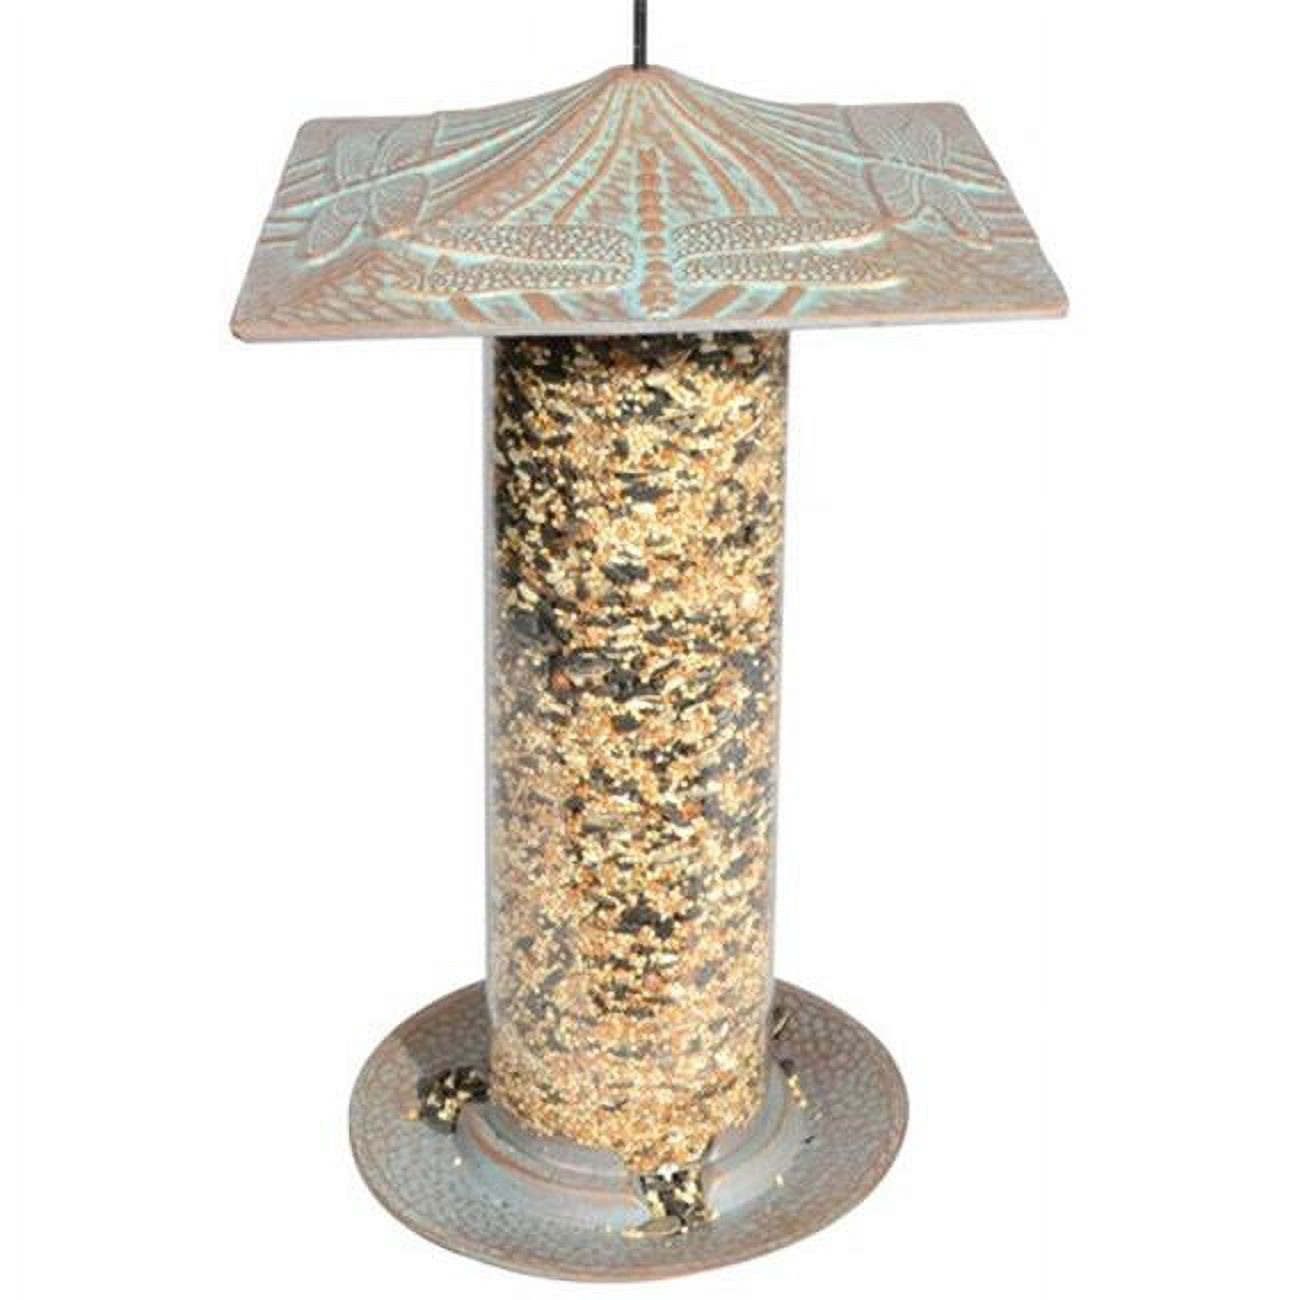 Whitehall Products 30038 12 in. Dragonfly Bird Tube Feeder - Copper Verdi - image 1 of 4